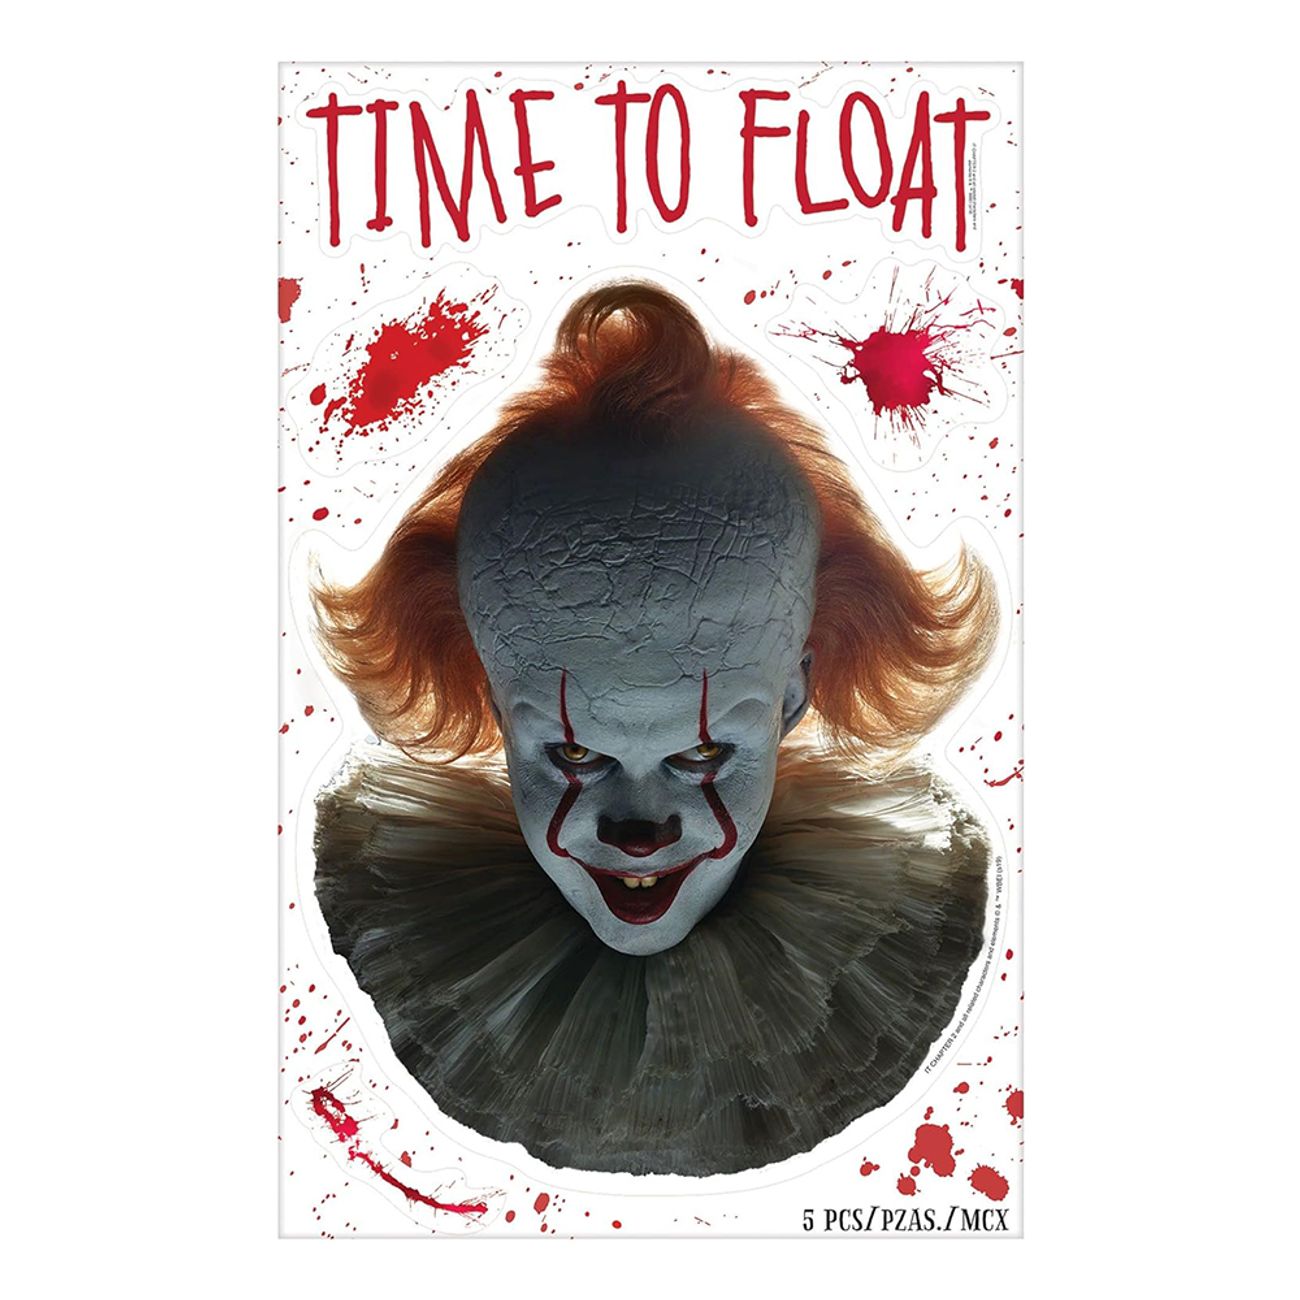 fonsterdekoration-pennywise-time-to-float-100595-2